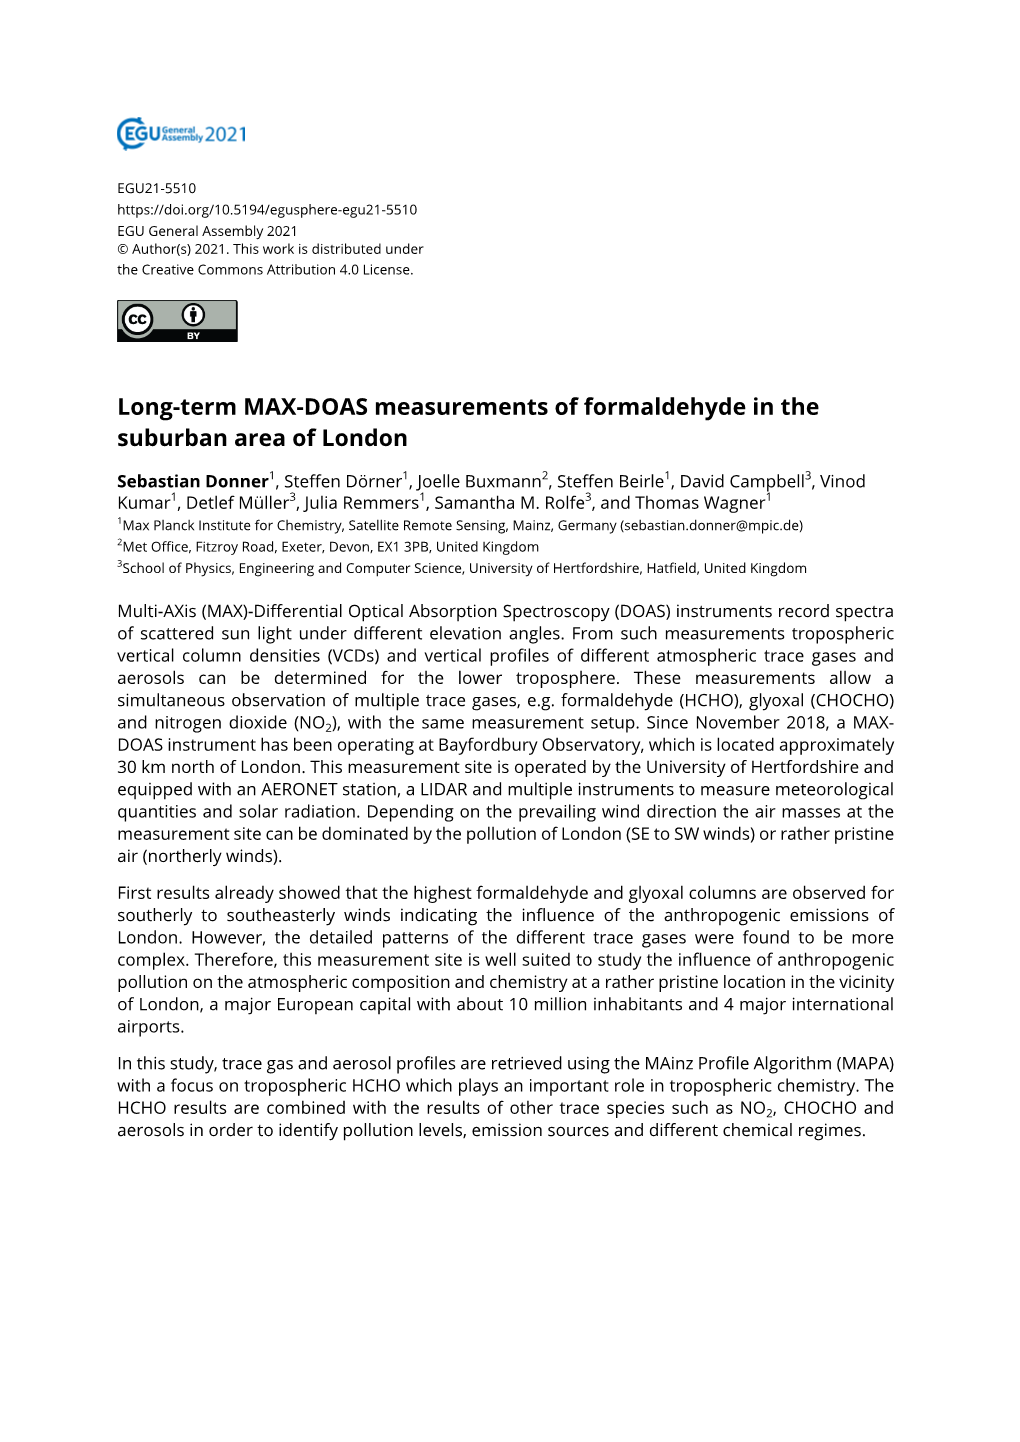 Long-Term MAX-DOAS Measurements of Formaldehyde in the Suburban Area of London